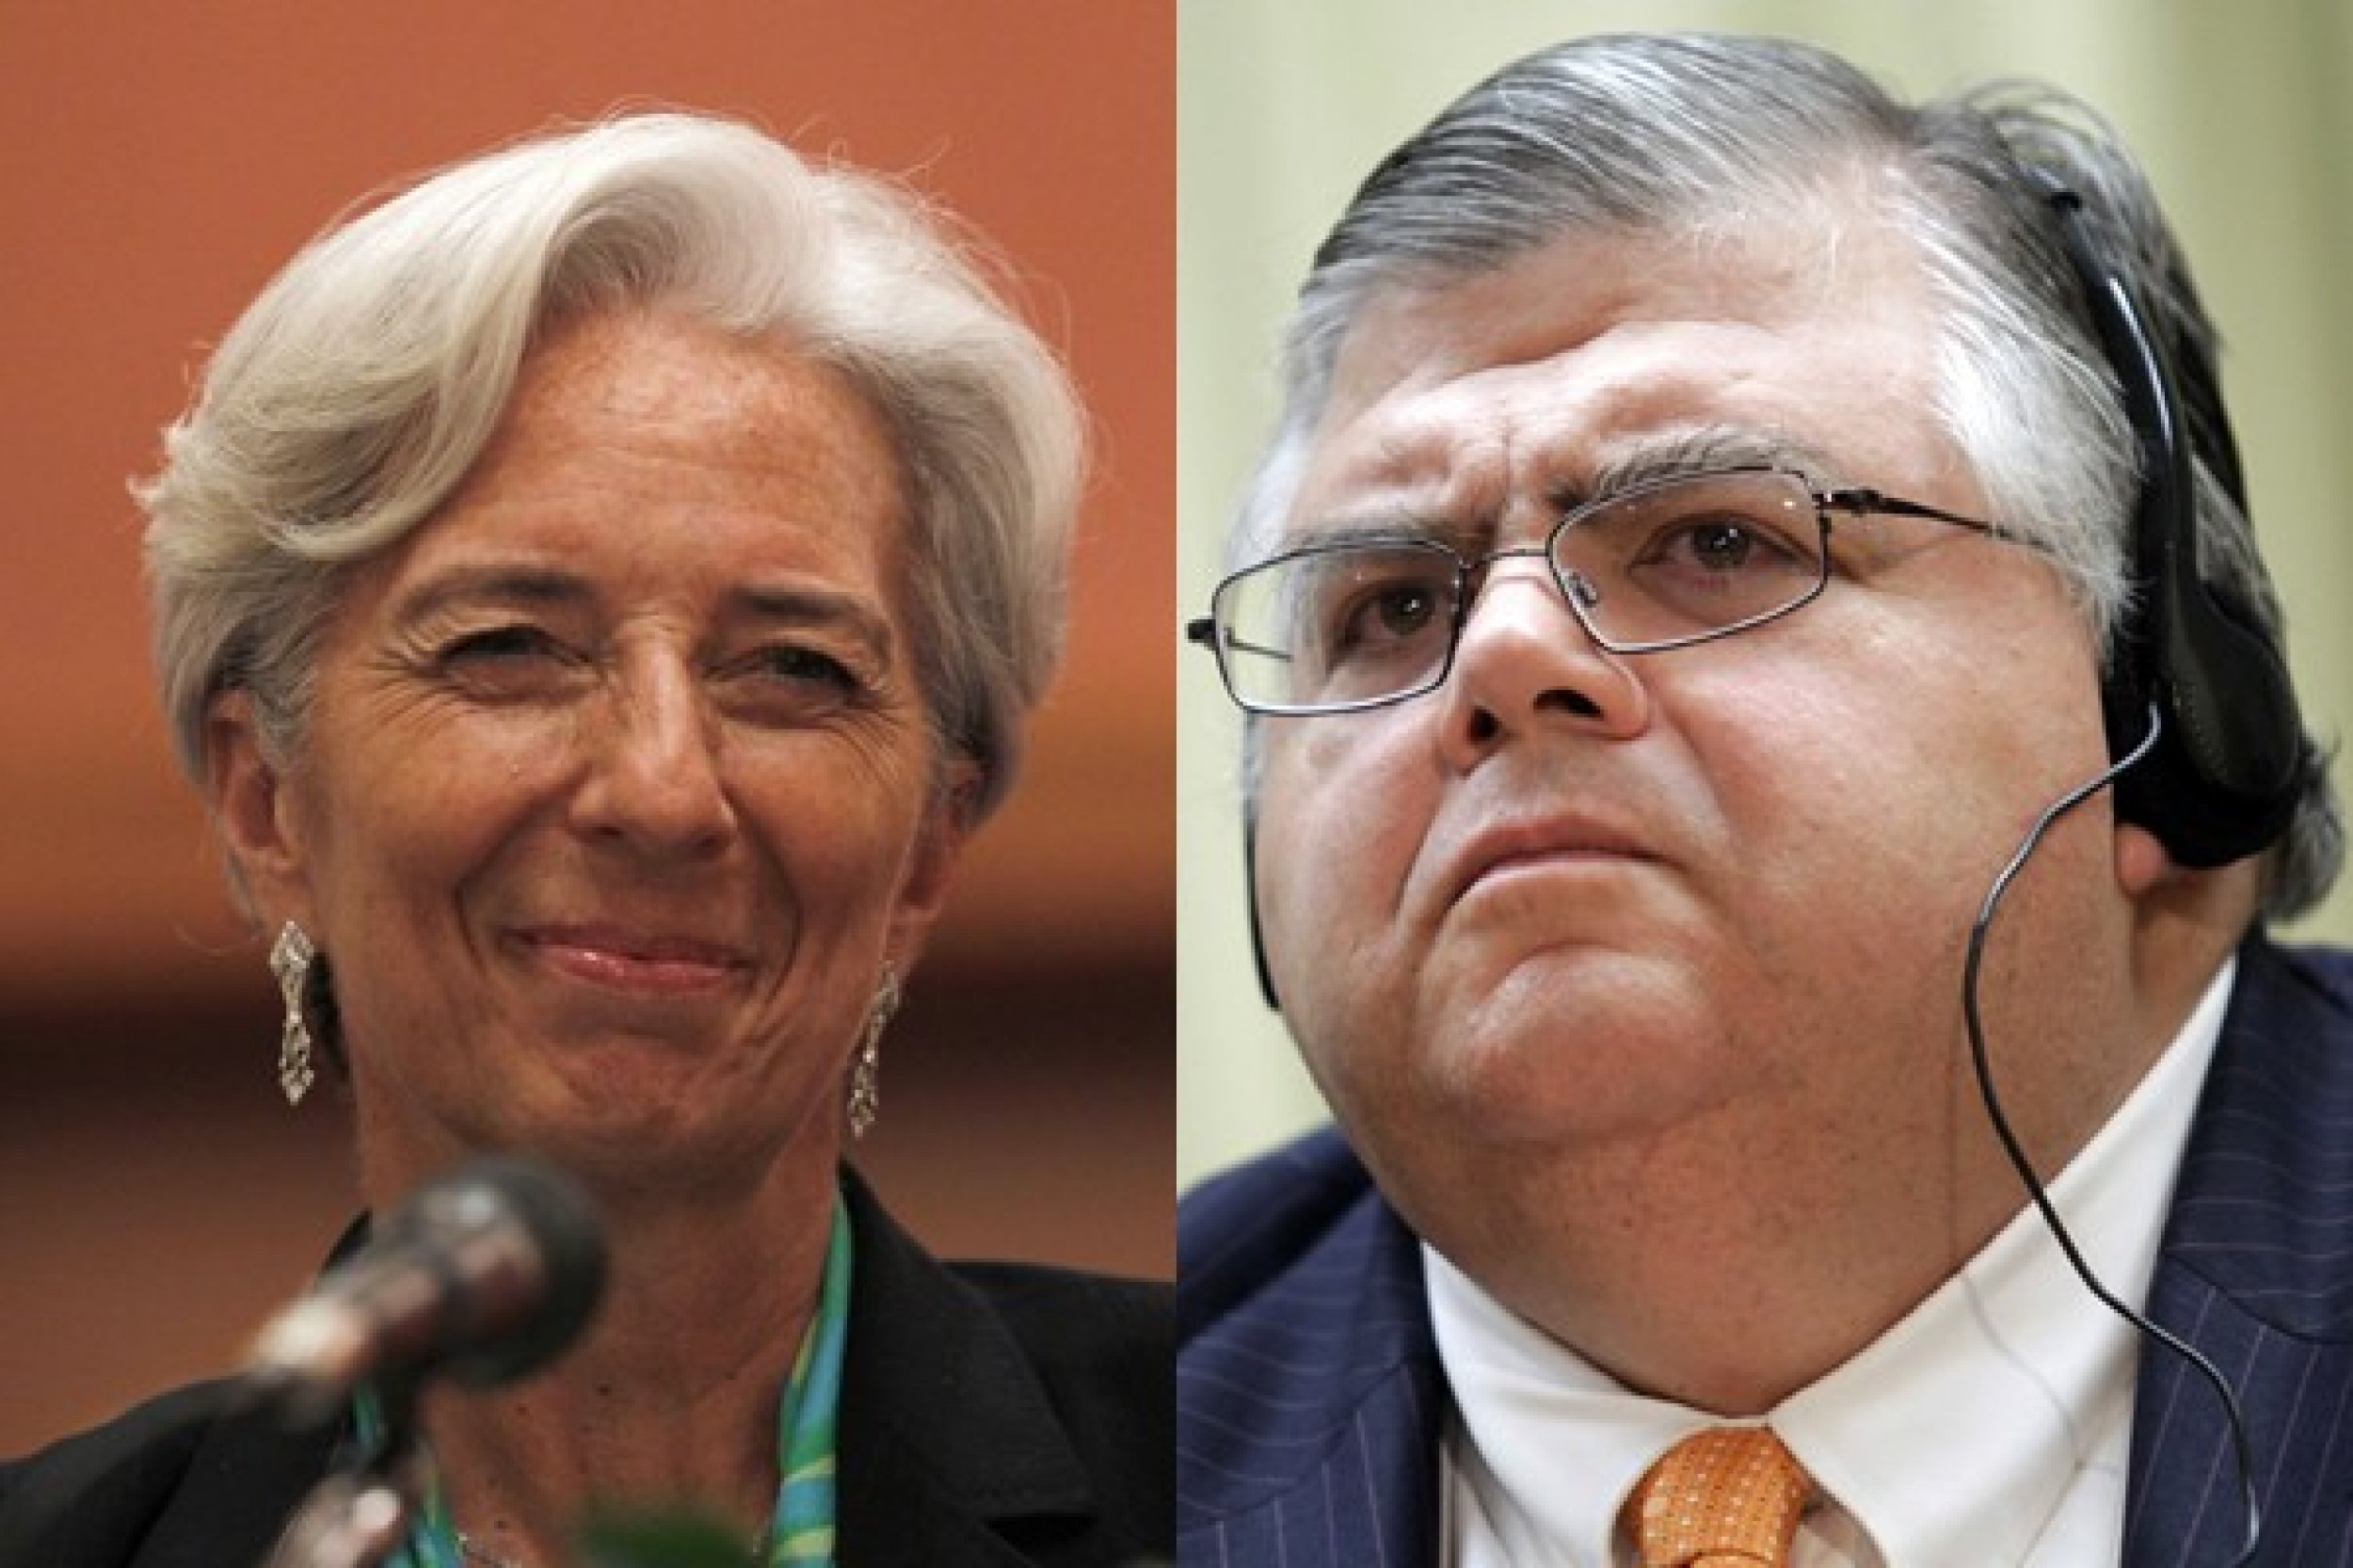 Lagarde and Carstens